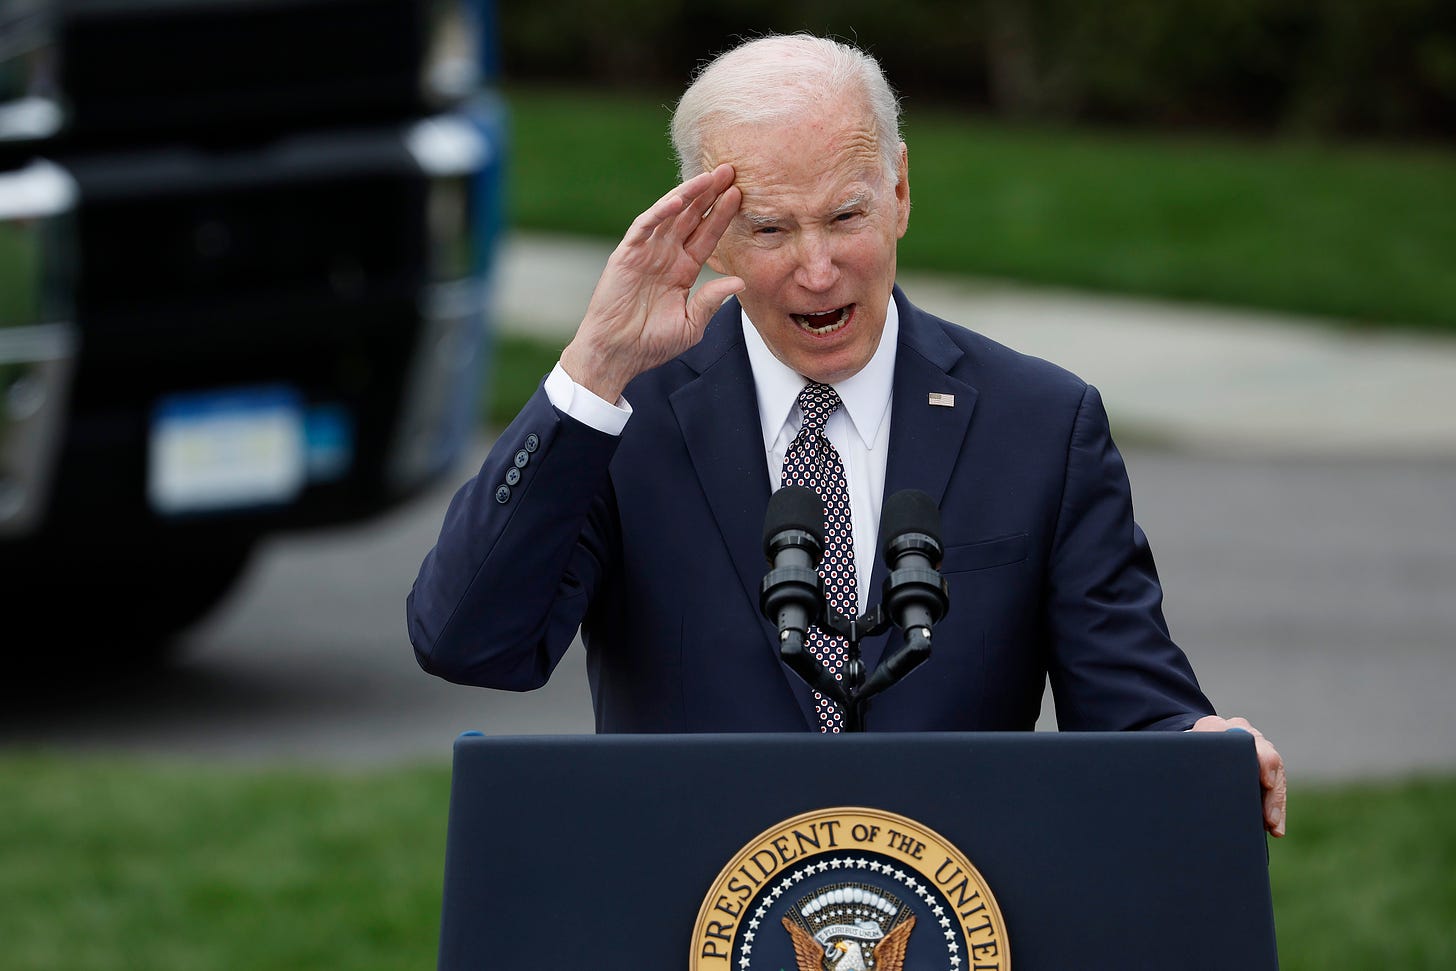 WASHINGTON, DC - APRIL 04: U.S. President Joe Biden delivers remarks on his 'Trucking Action Plan' on the South Lawn of the White House on April 04, 2022 in Washington, DC. Joined by Transportation Secretary Pete Buttigieg, Biden talked about his administration's plan 'to strengthen our nation’s supply chains, including by bringing more veterans and women into the industry,' according to the White House. (Photo by Chip Somodevilla/Getty Images)